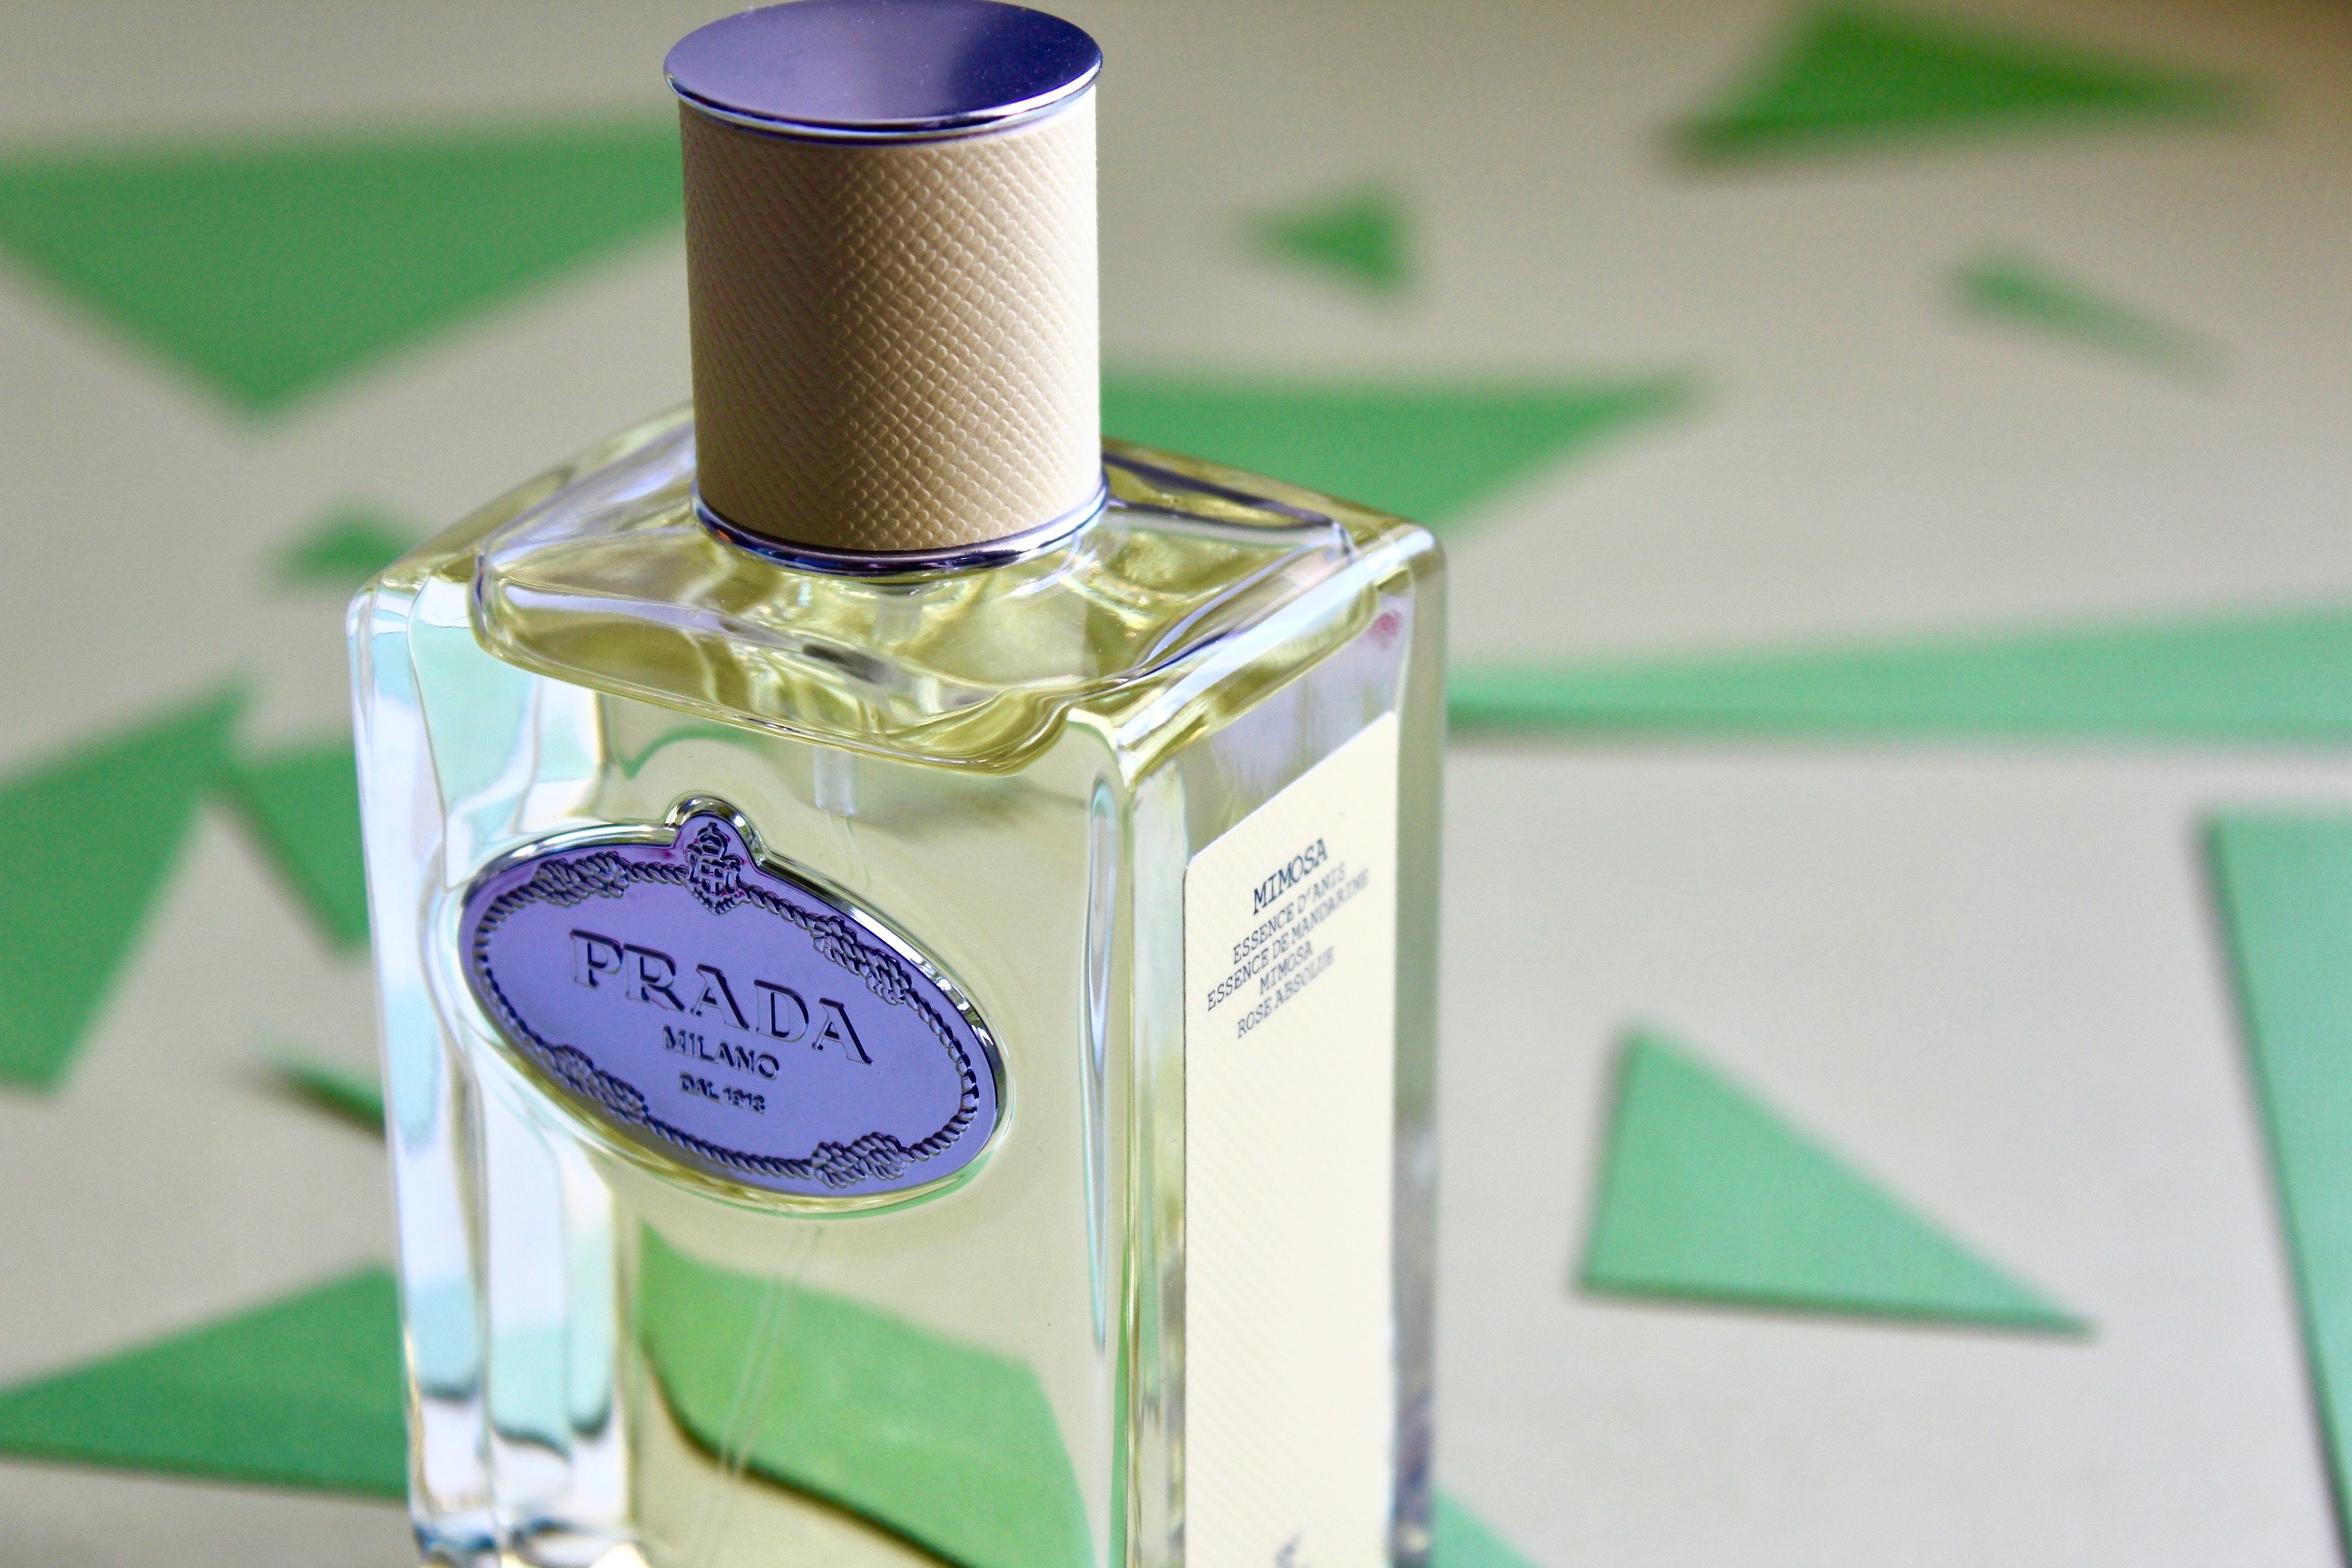 LES INFUSIONS DE PRADA PERFUME COLLECTION REVIEW